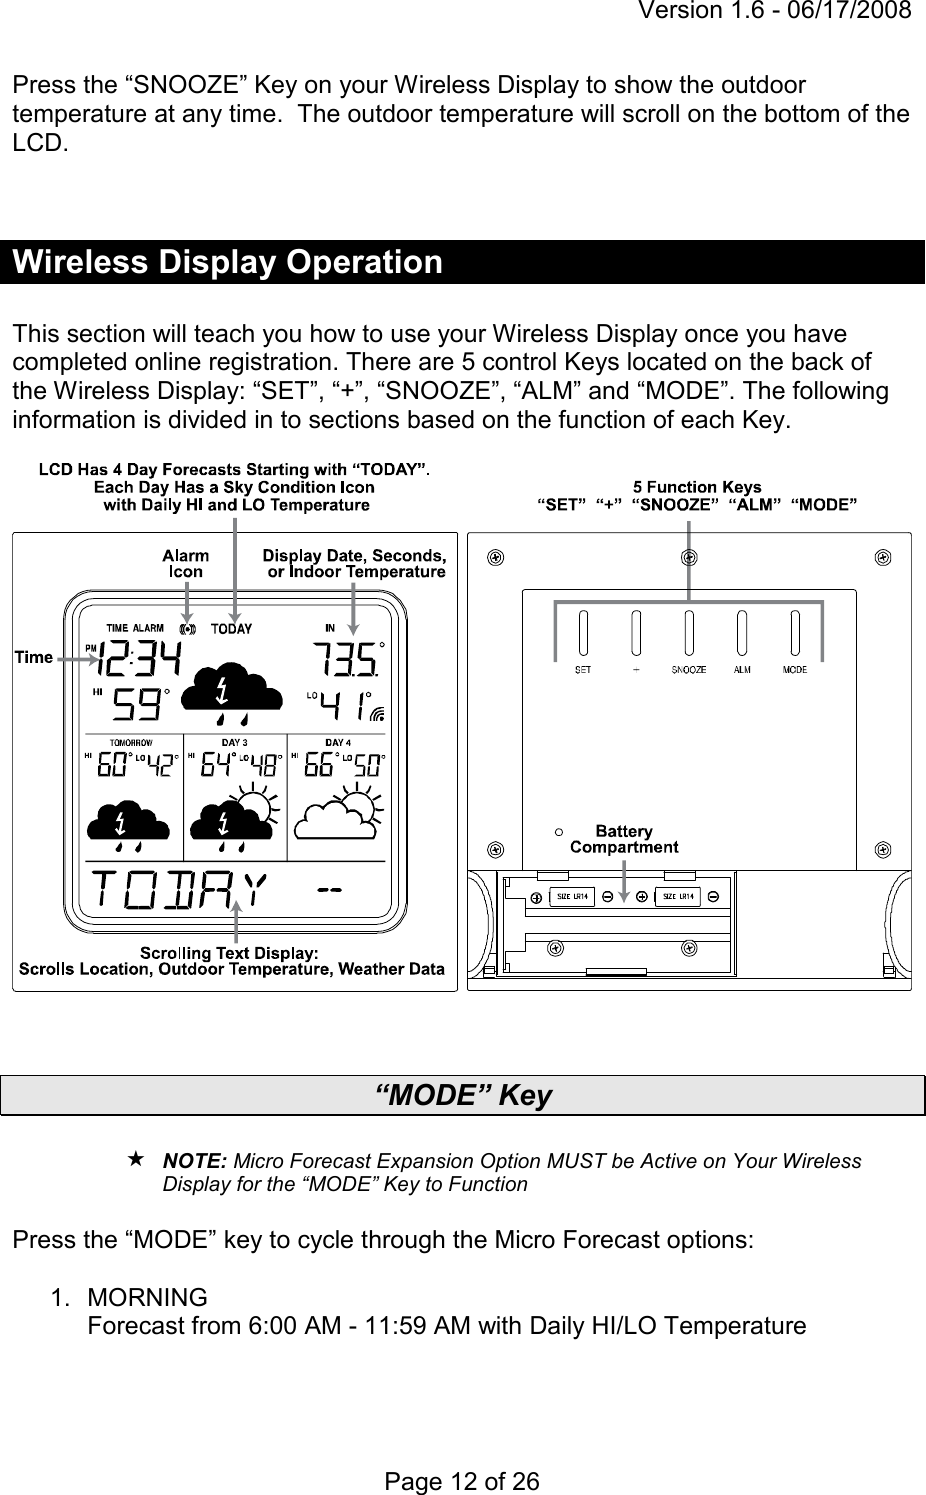 Version 1.6 - 06/17/2008 Page 12 of 26 Press the “SNOOZE” Key on your Wireless Display to show the outdoor temperature at any time.  The outdoor temperature will scroll on the bottom of the LCD.   Wireless Display Operation  This section will teach you how to use your Wireless Display once you have completed online registration. There are 5 control Keys located on the back of the Wireless Display: “SET”, “+”, “SNOOZE”, “ALM” and “MODE”. The following information is divided in to sections based on the function of each Key.     “MODE” Key   NOTE: Micro Forecast Expansion Option MUST be Active on Your Wireless Display for the “MODE” Key to Function  Press the “MODE” key to cycle through the Micro Forecast options:  1.  MORNING  Forecast from 6:00 AM - 11:59 AM with Daily HI/LO Temperature  